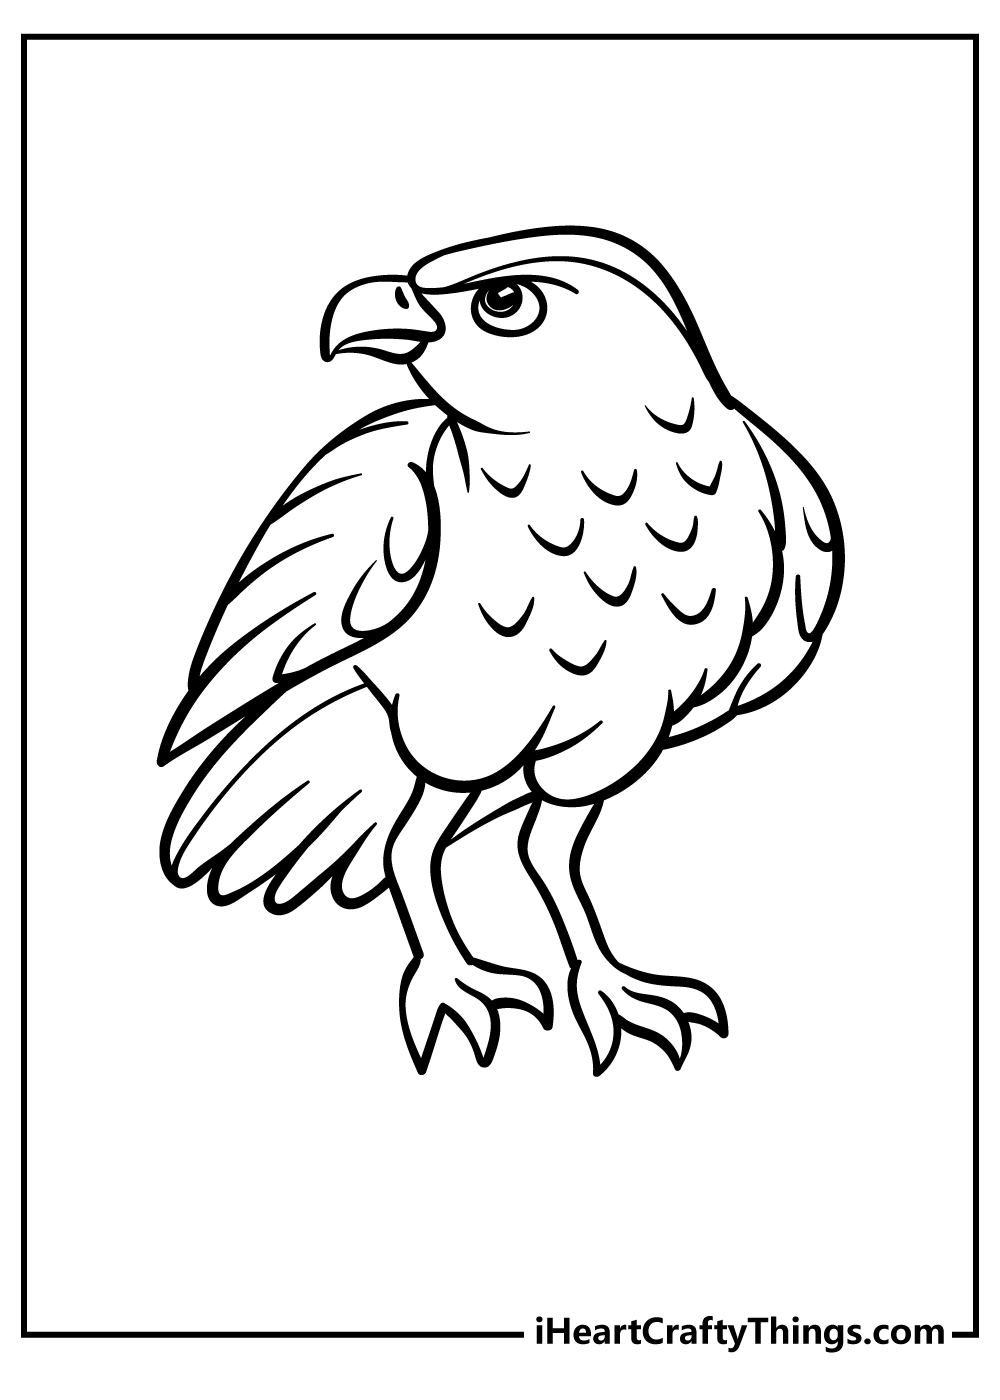 Hawk Coloring Pages for adults free printable